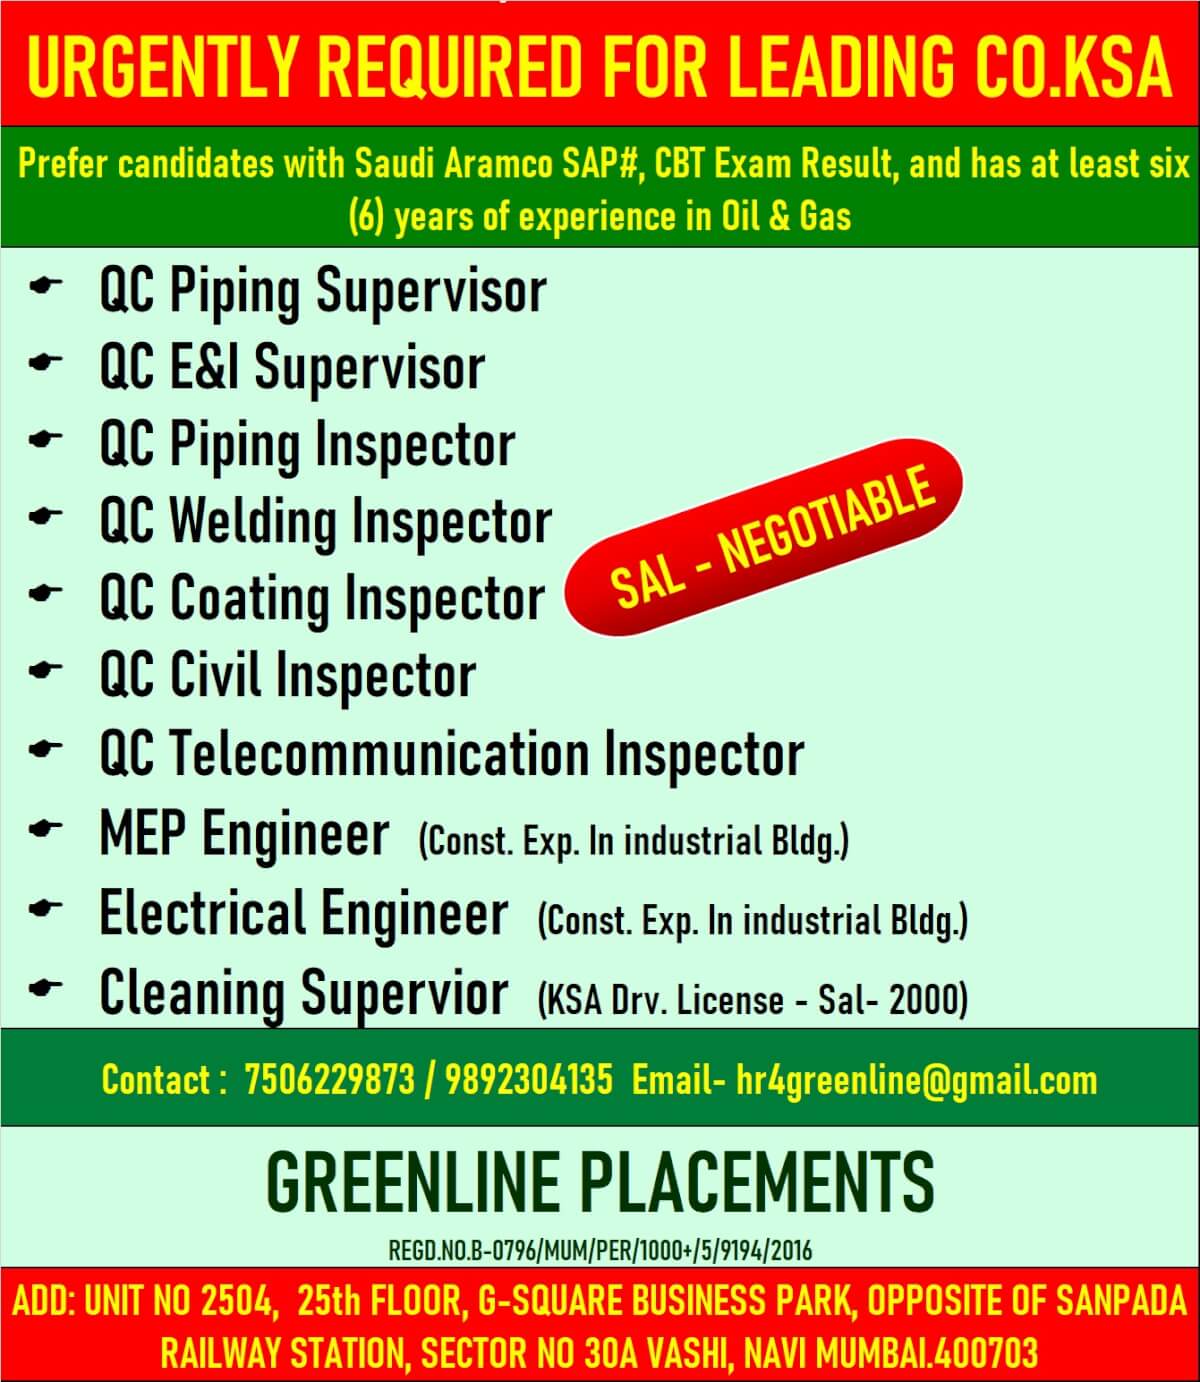 URGENTLY REQUIRED FOR LEADING COMPANY IN KSA